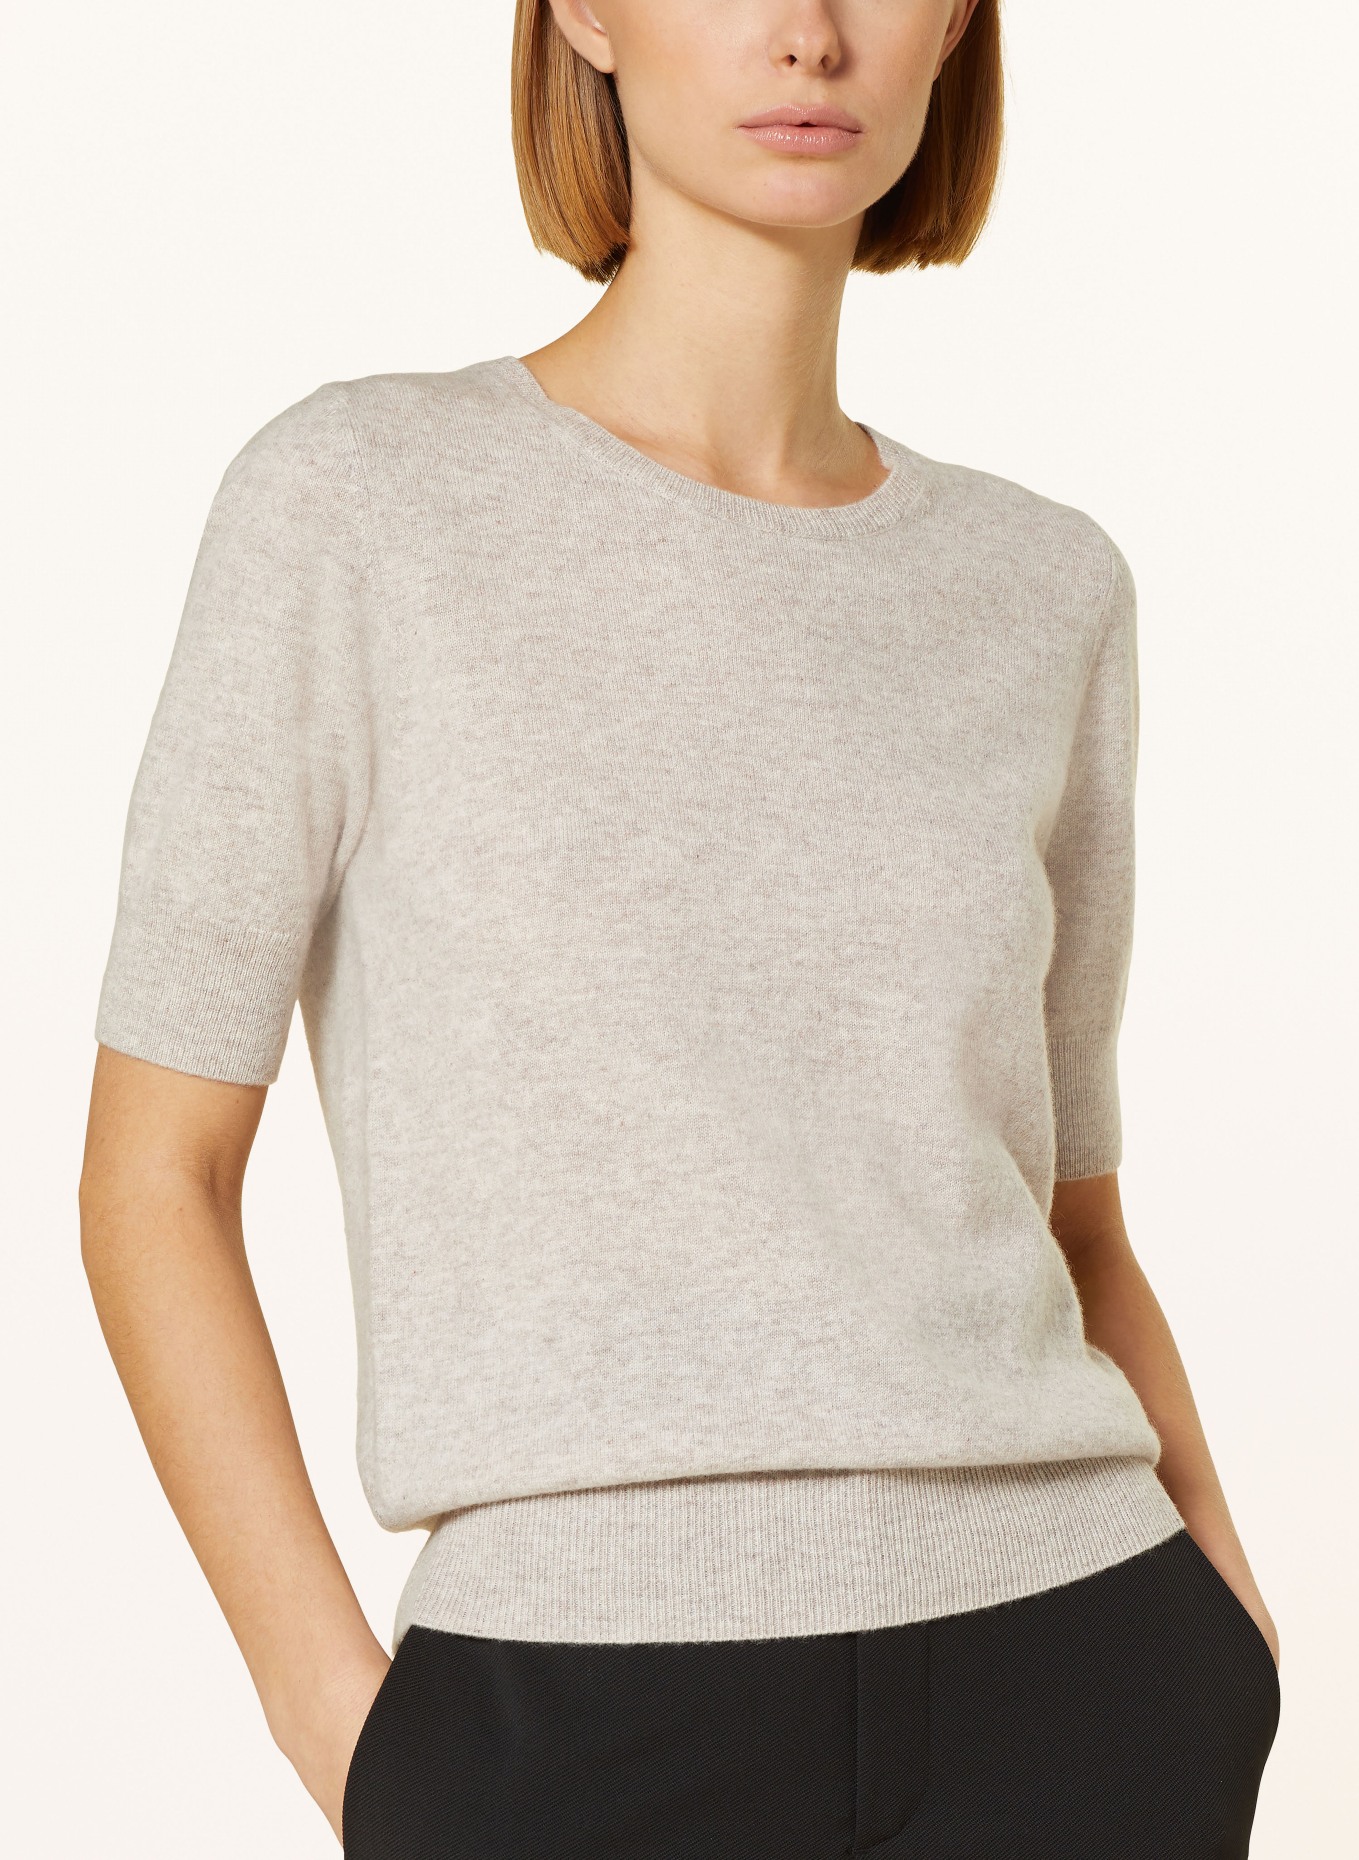 REPEAT Knit shirt in cashmere, Color: BEIGE (Image 4)